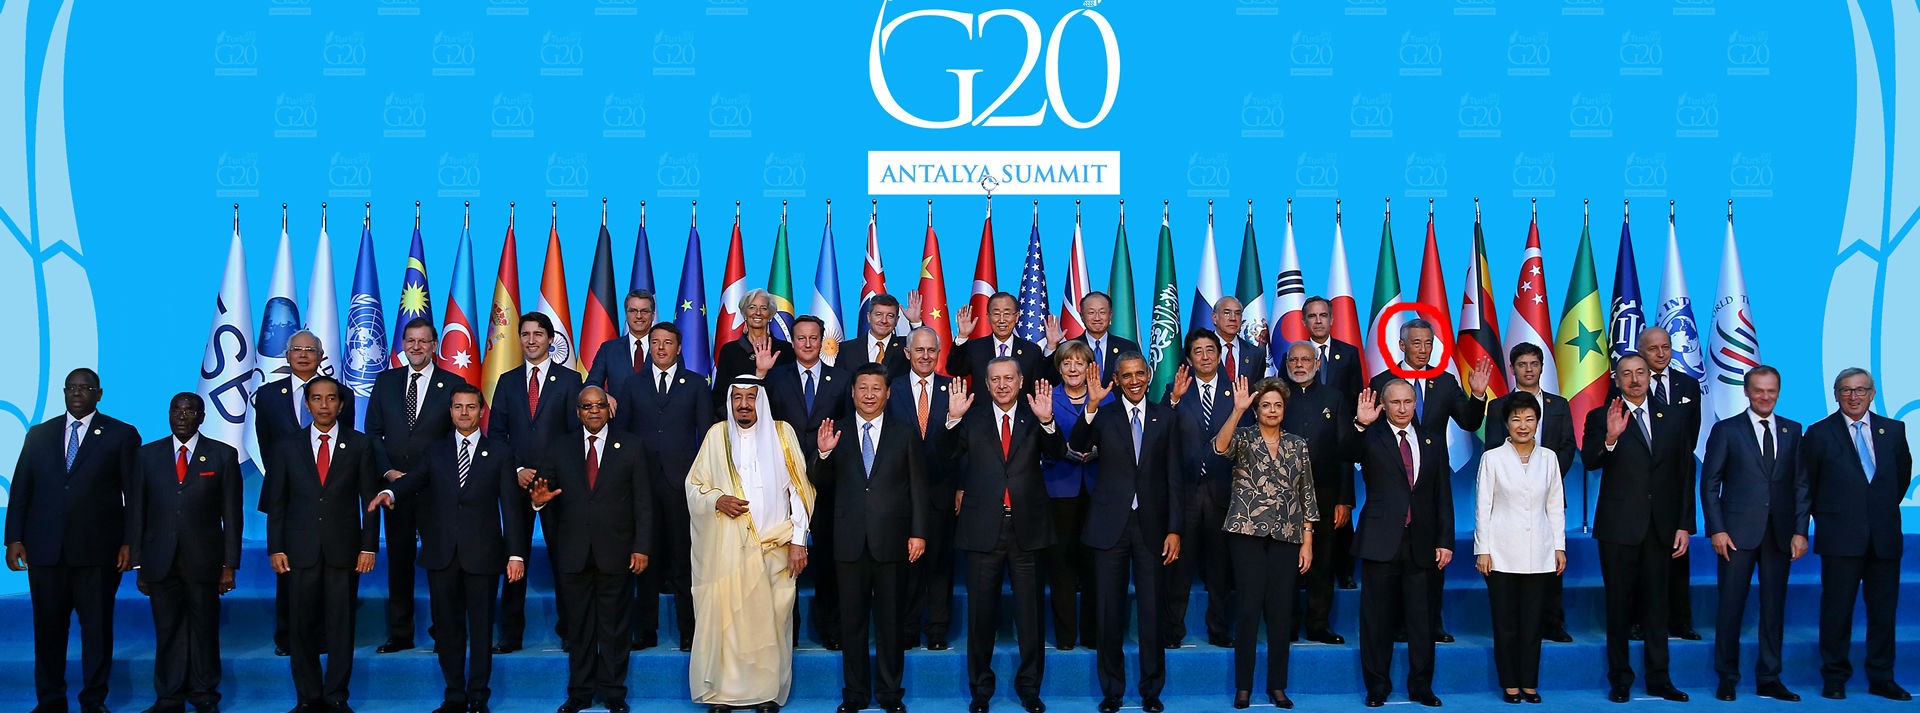 5 things you need to know about the G20 Summit in very simple English